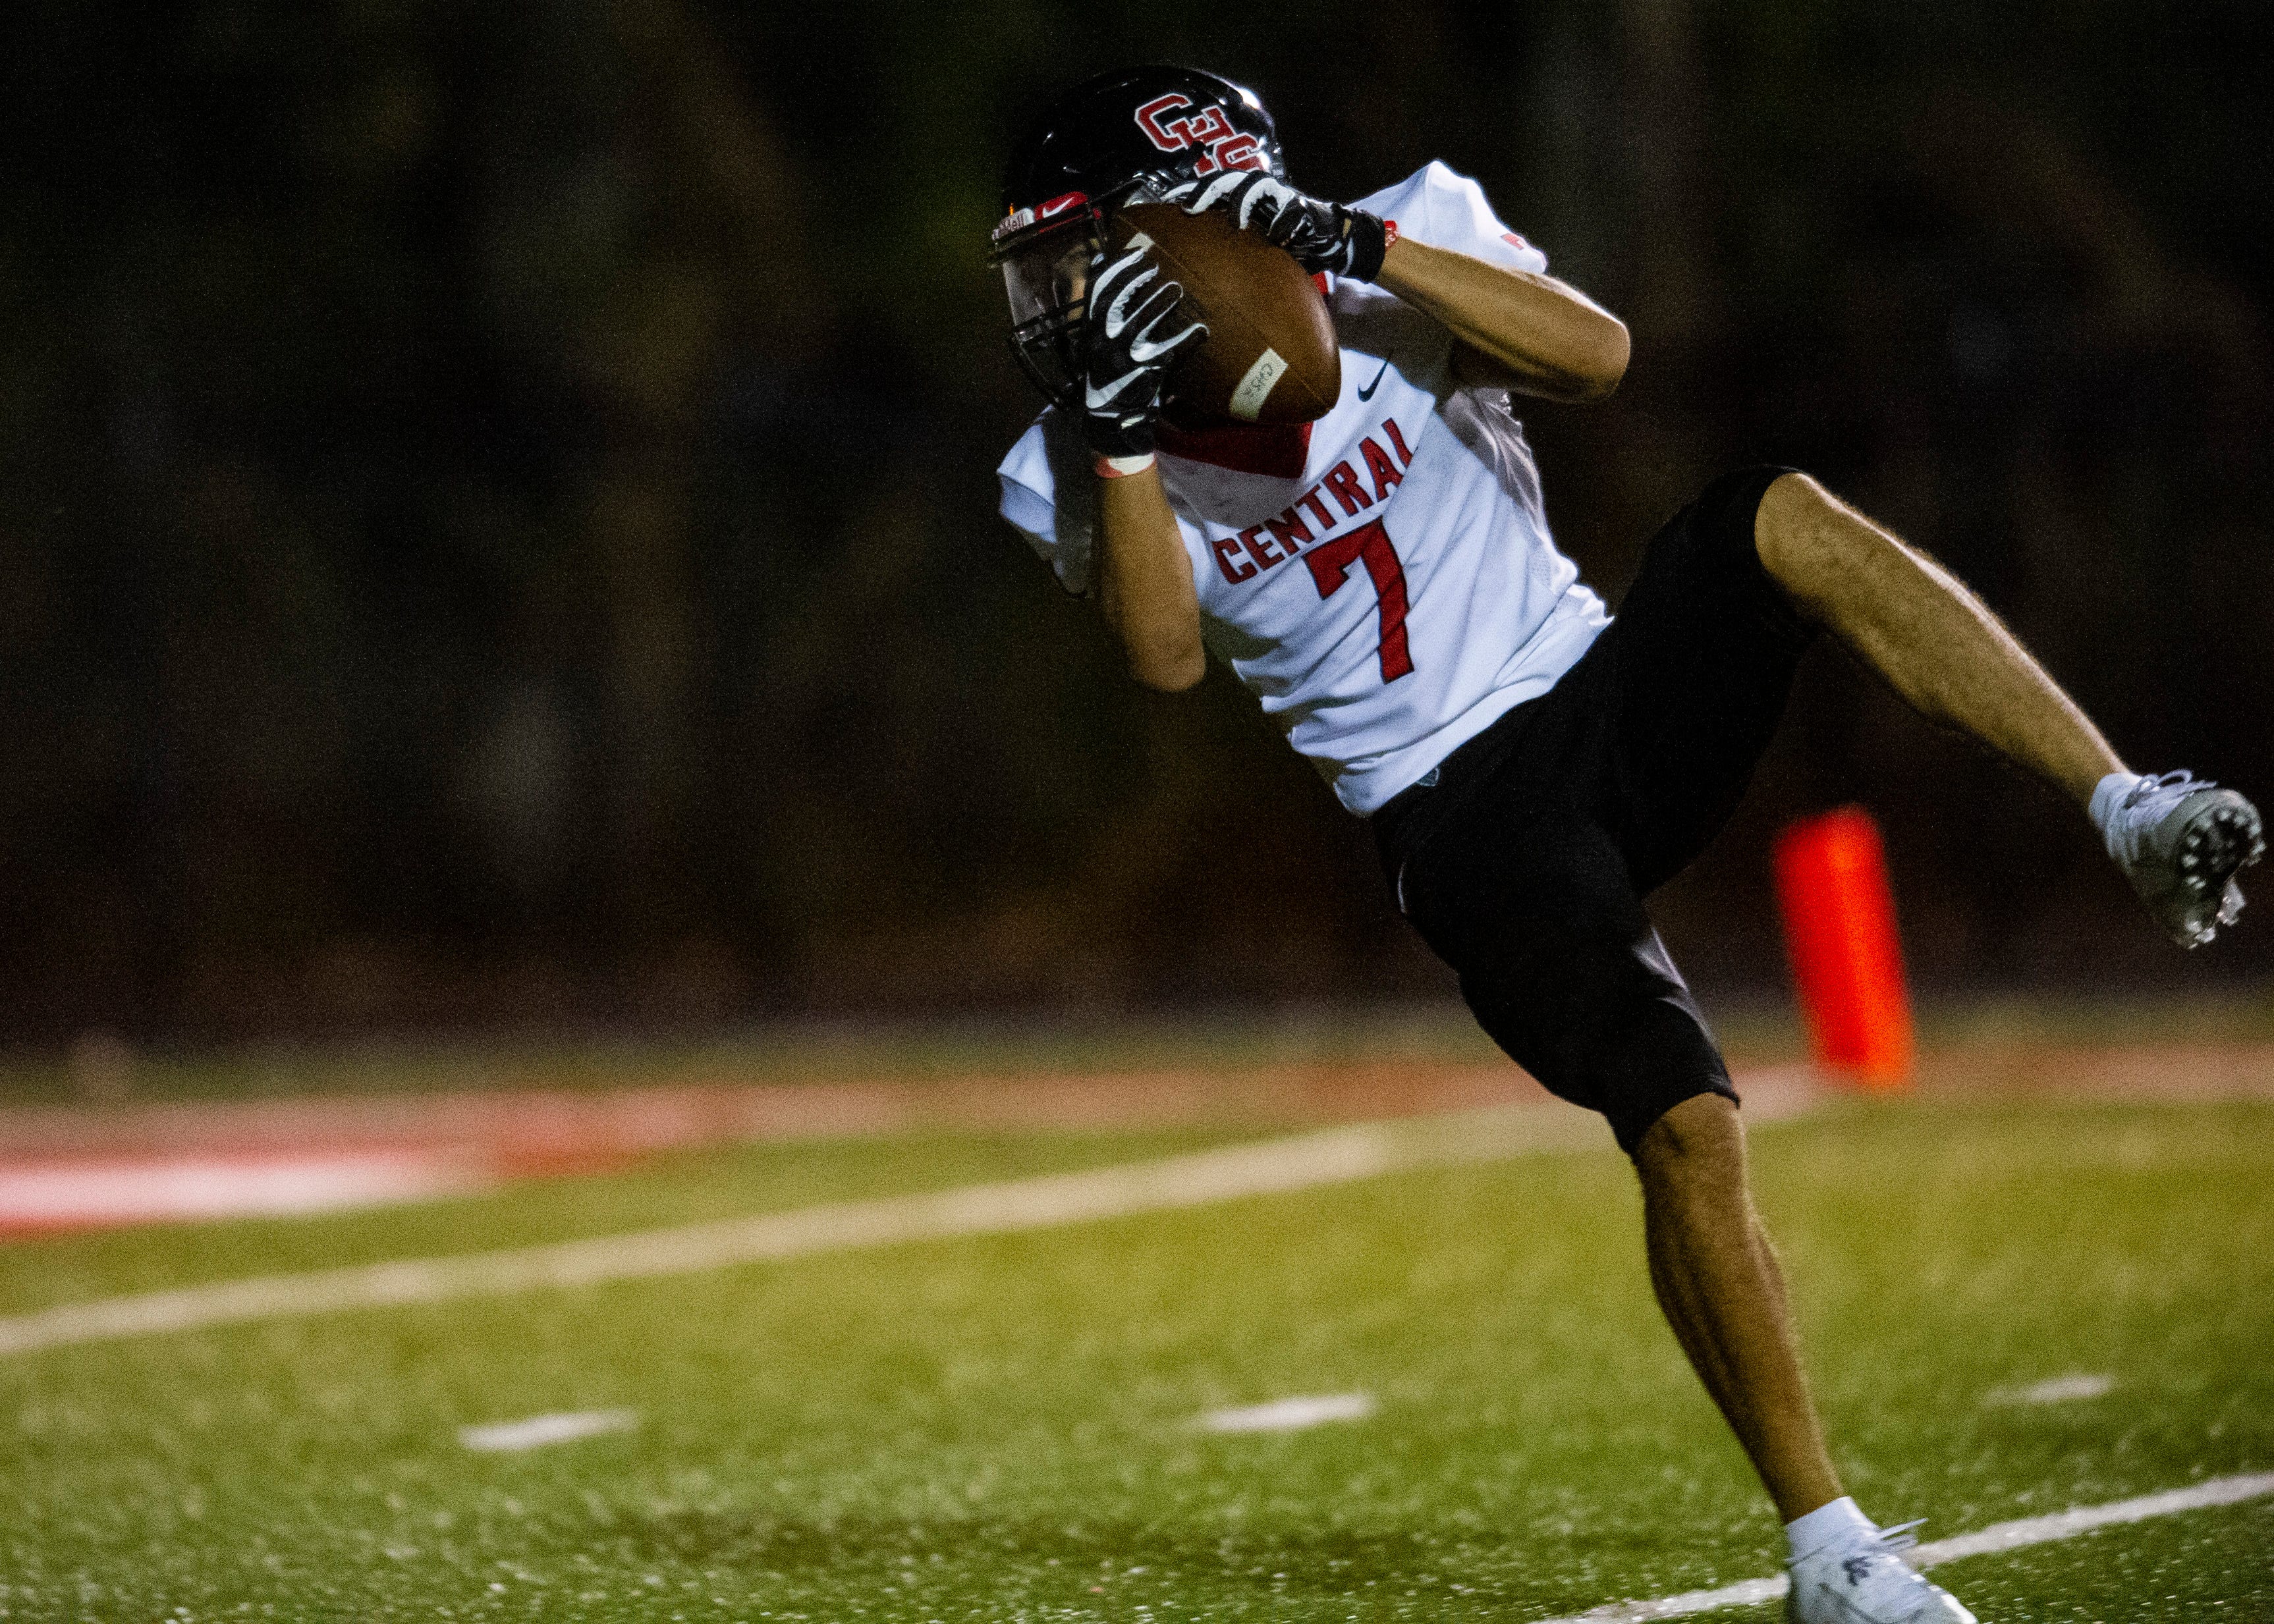 Central's Braden Gaston (7) catches the ball during the Halls and Central high school football game on Friday, October 4, 2019 at Halls High School.